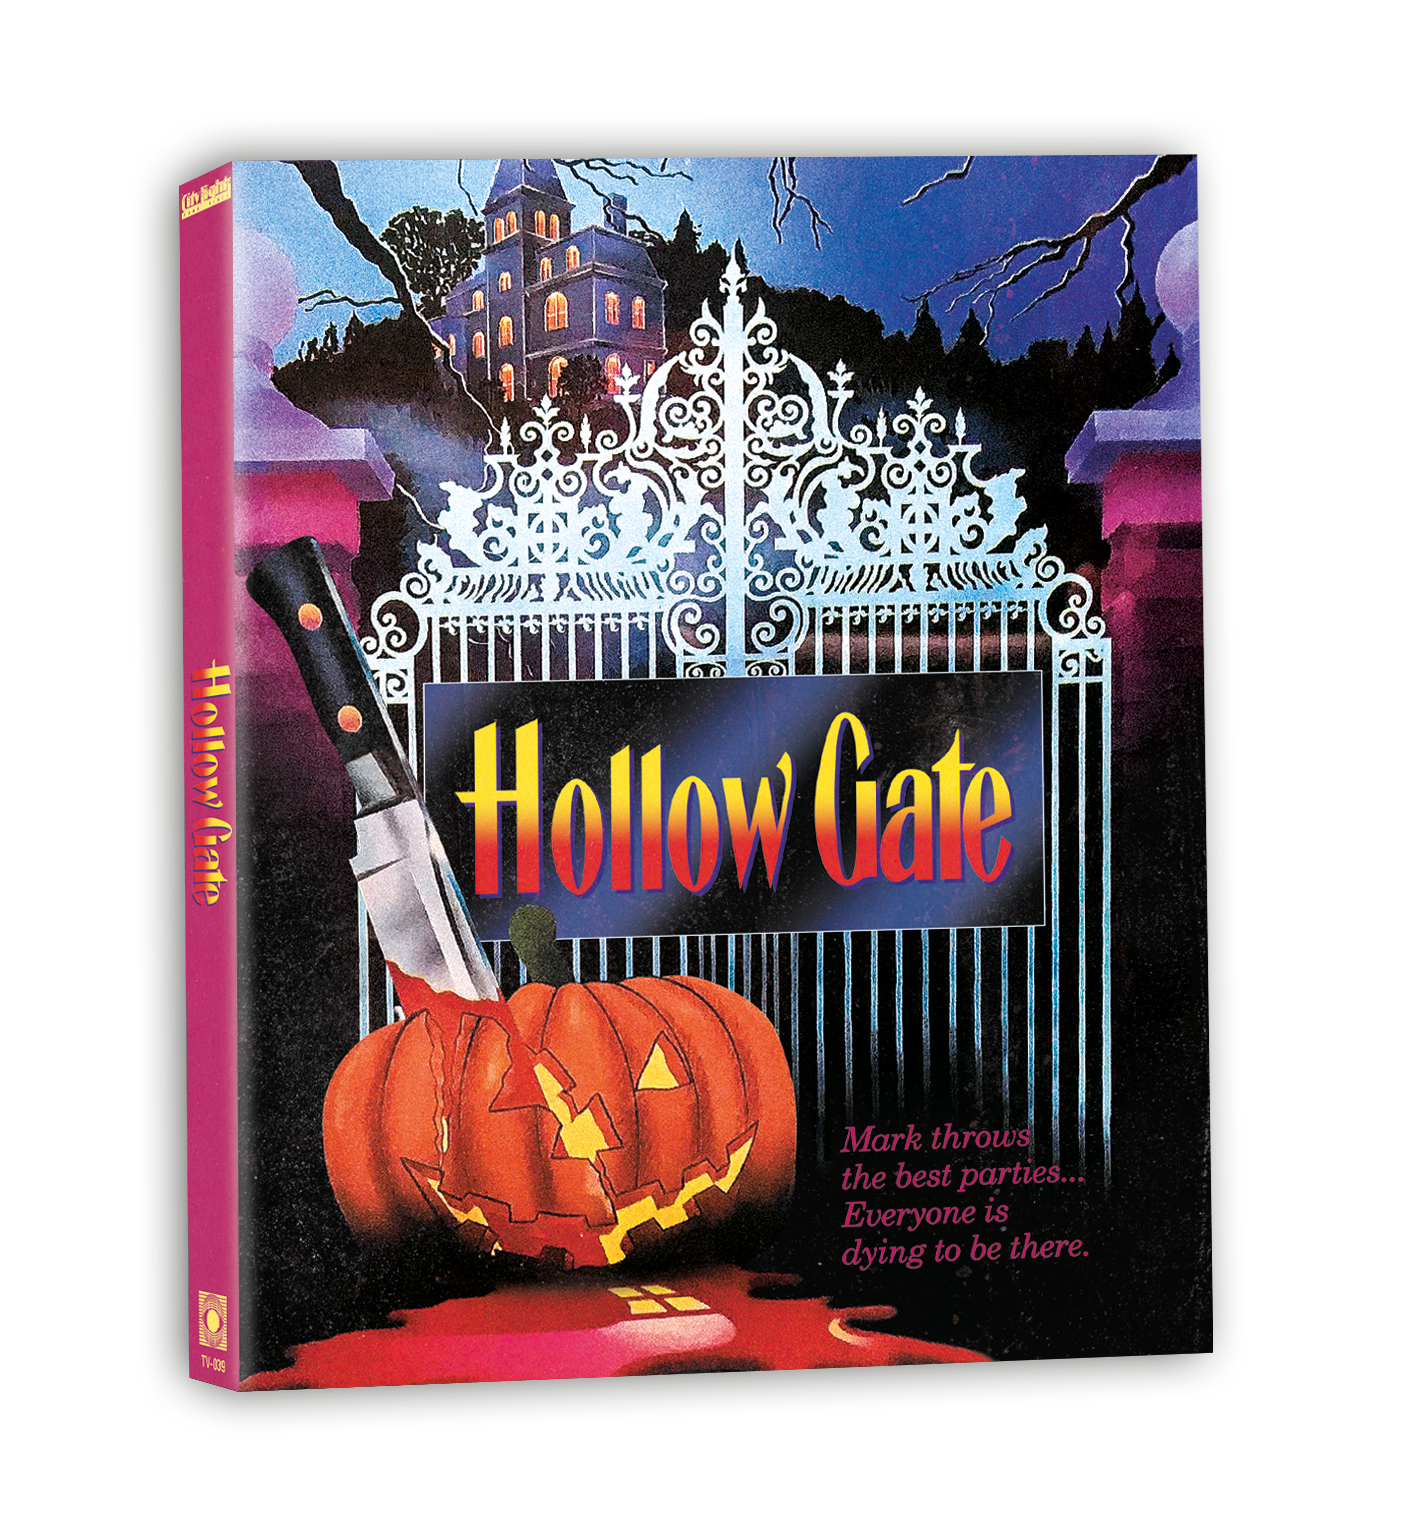 Hollow Gate (1988) Blu-ray with Slip